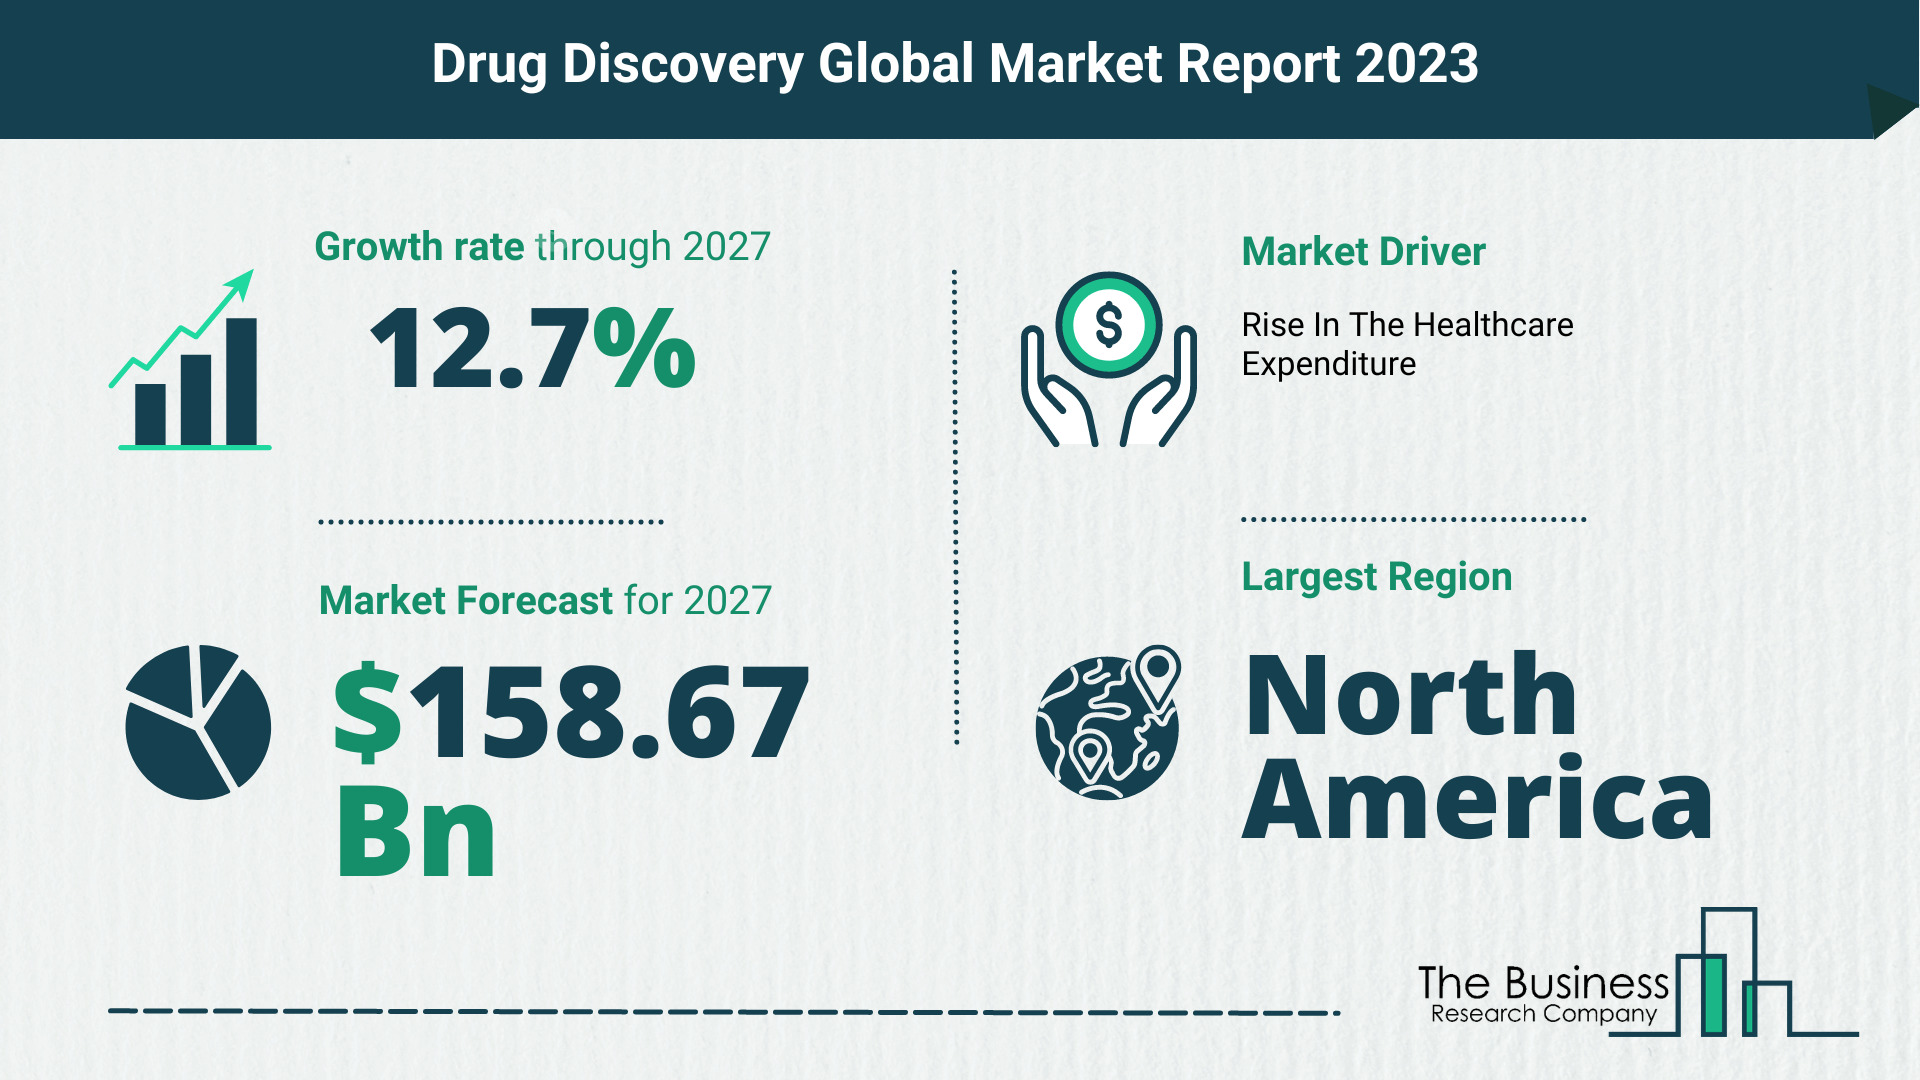 Global Drug Discovery Market Opportunities And Strategies 2023